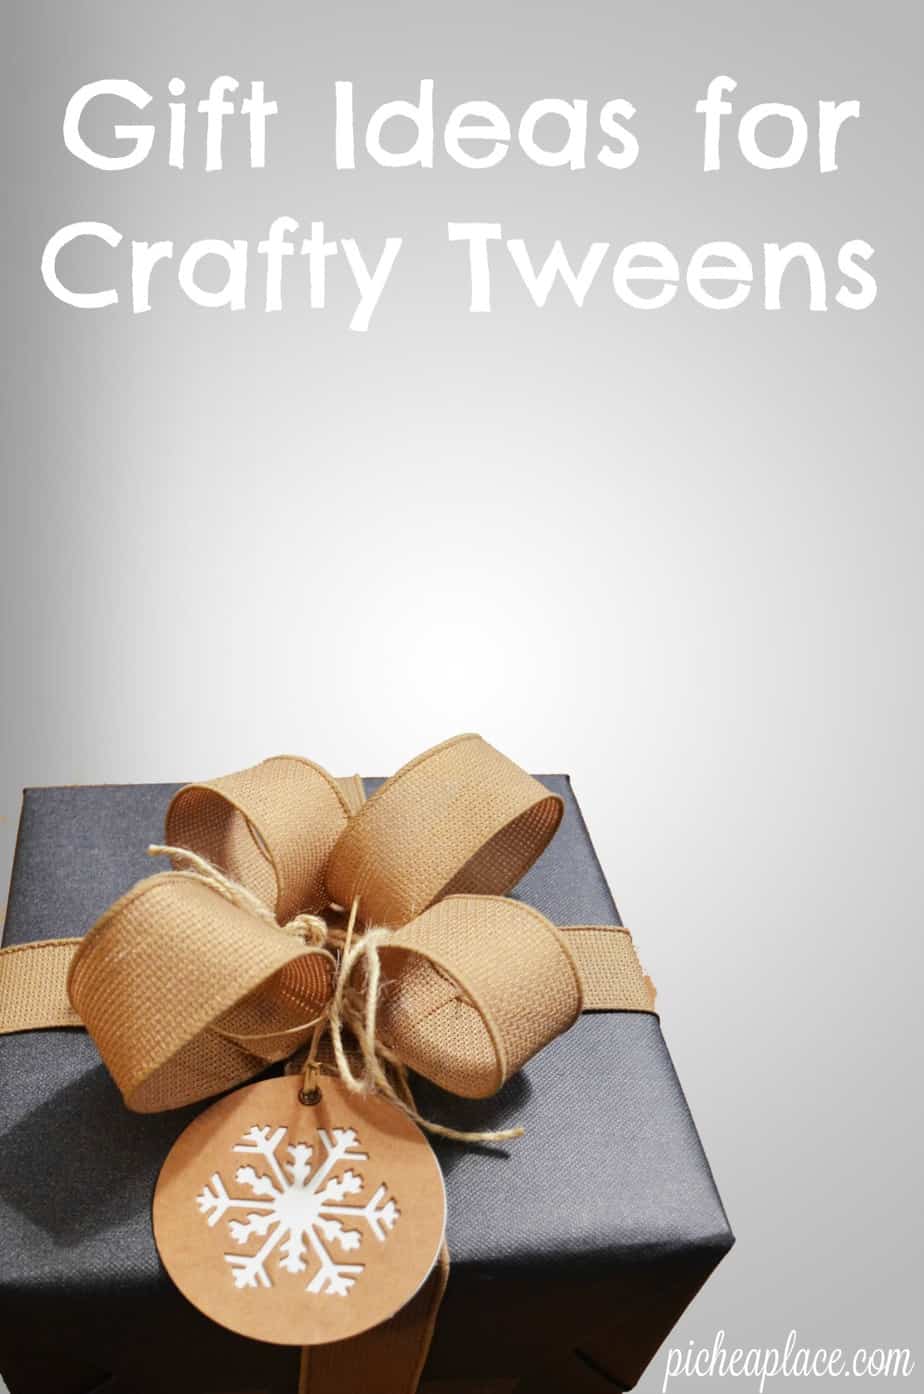 It can be difficult to come up with great gift ideas for tweens and teens. My tween girl loves to do crafts and DIY projects, so I have created a list of ideas of gifts she would enjoy receiving. Hopefully it will spark some great gift ideas for crafty tweens in your life!